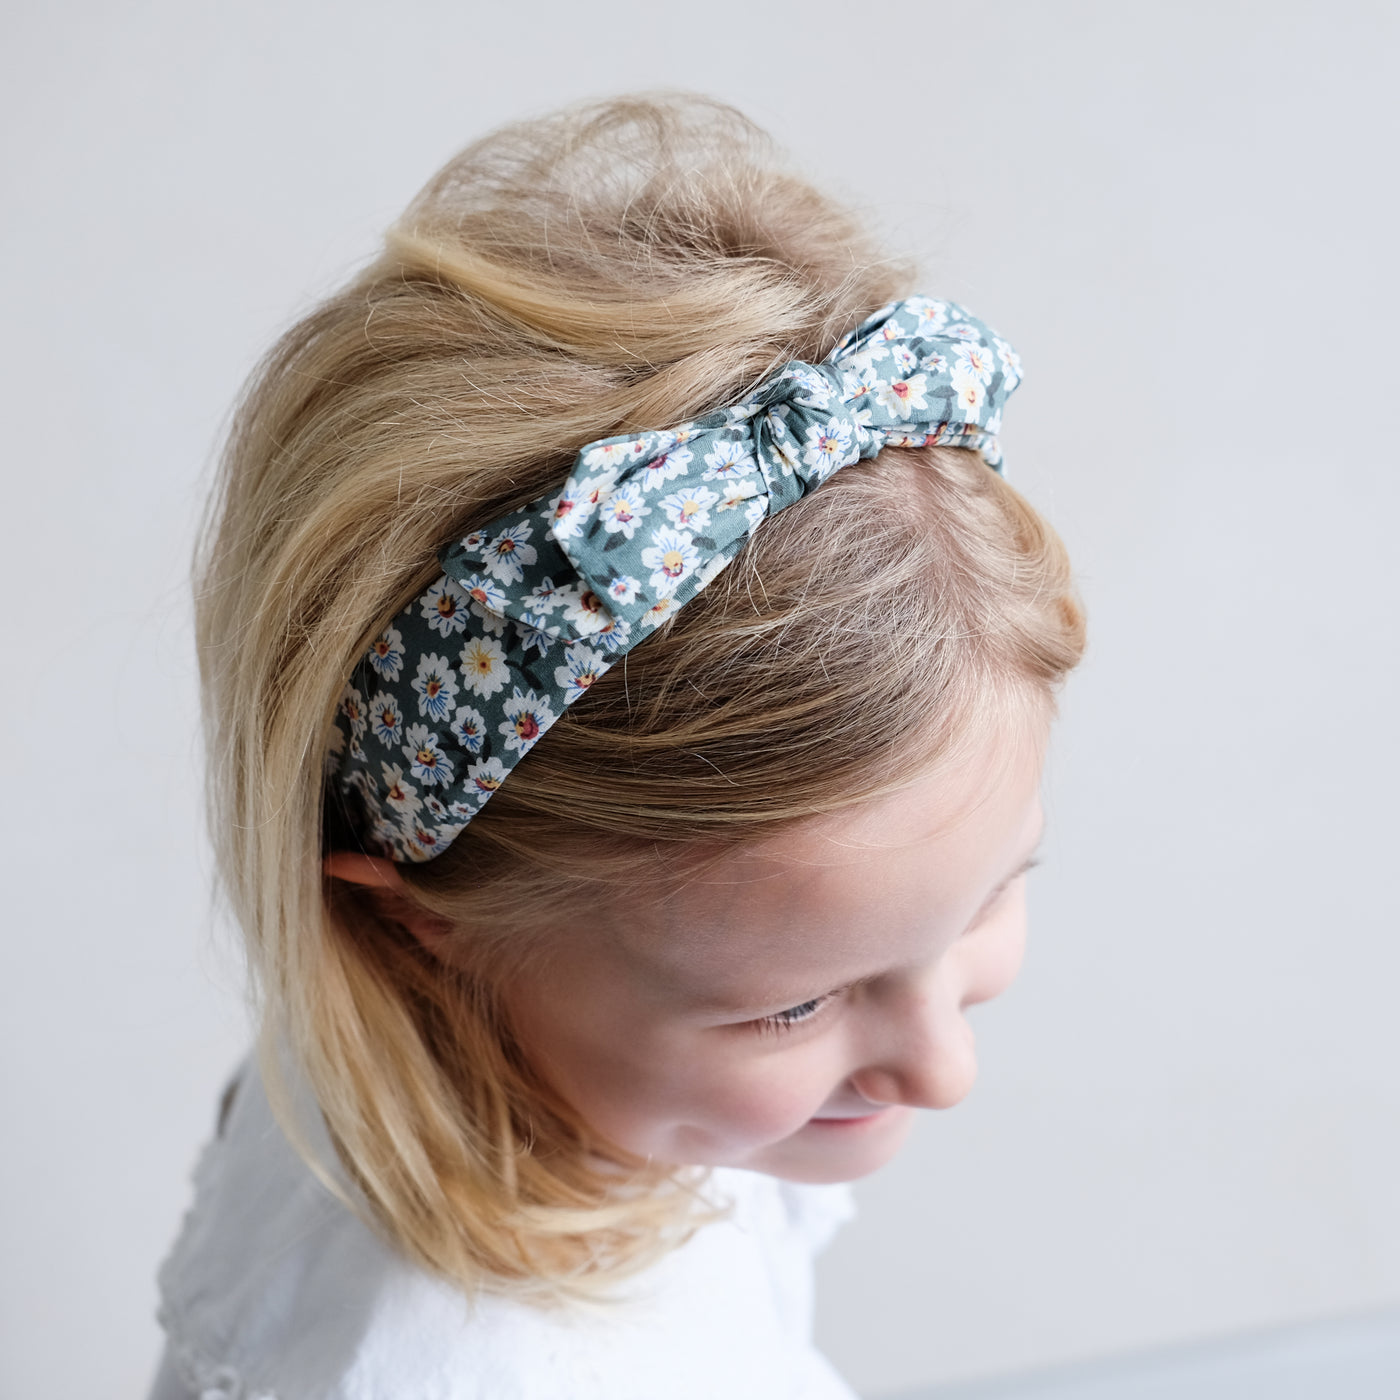 Little girl wearing daisy print floral Alice band with bow